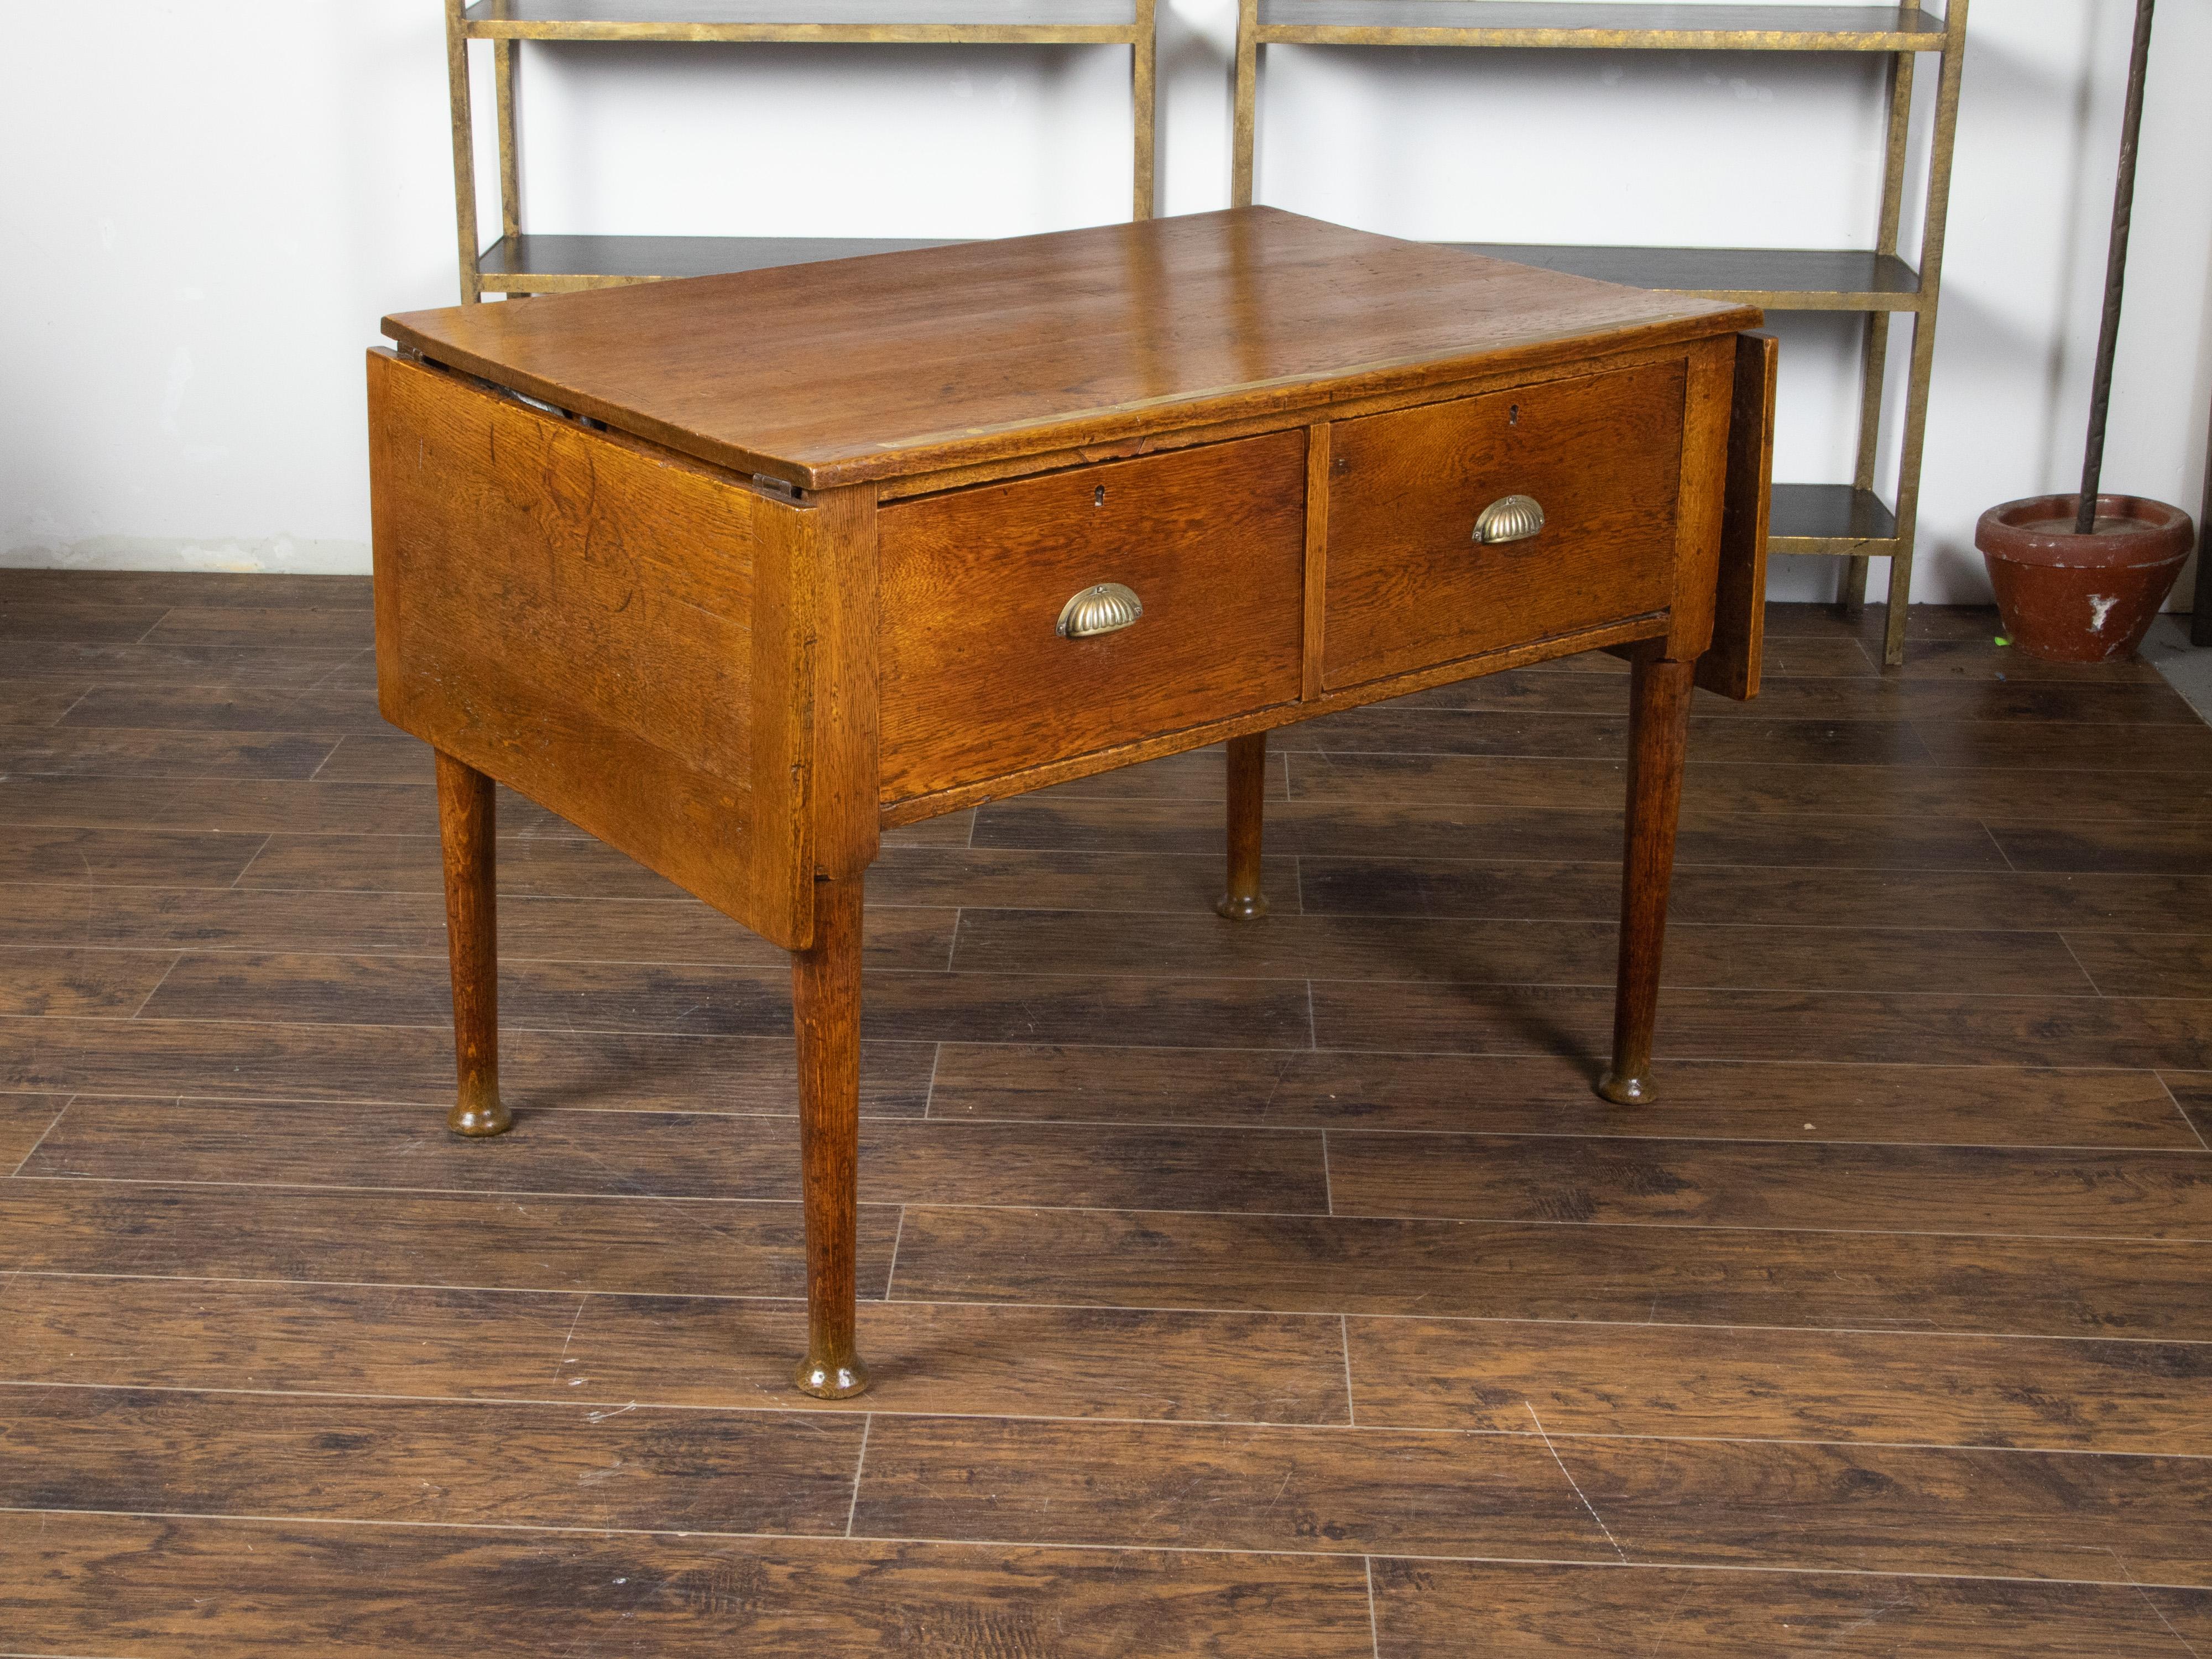 English 19th Century Oak Drop Leaves Draper's Table with Brass Measuring Tape For Sale 2